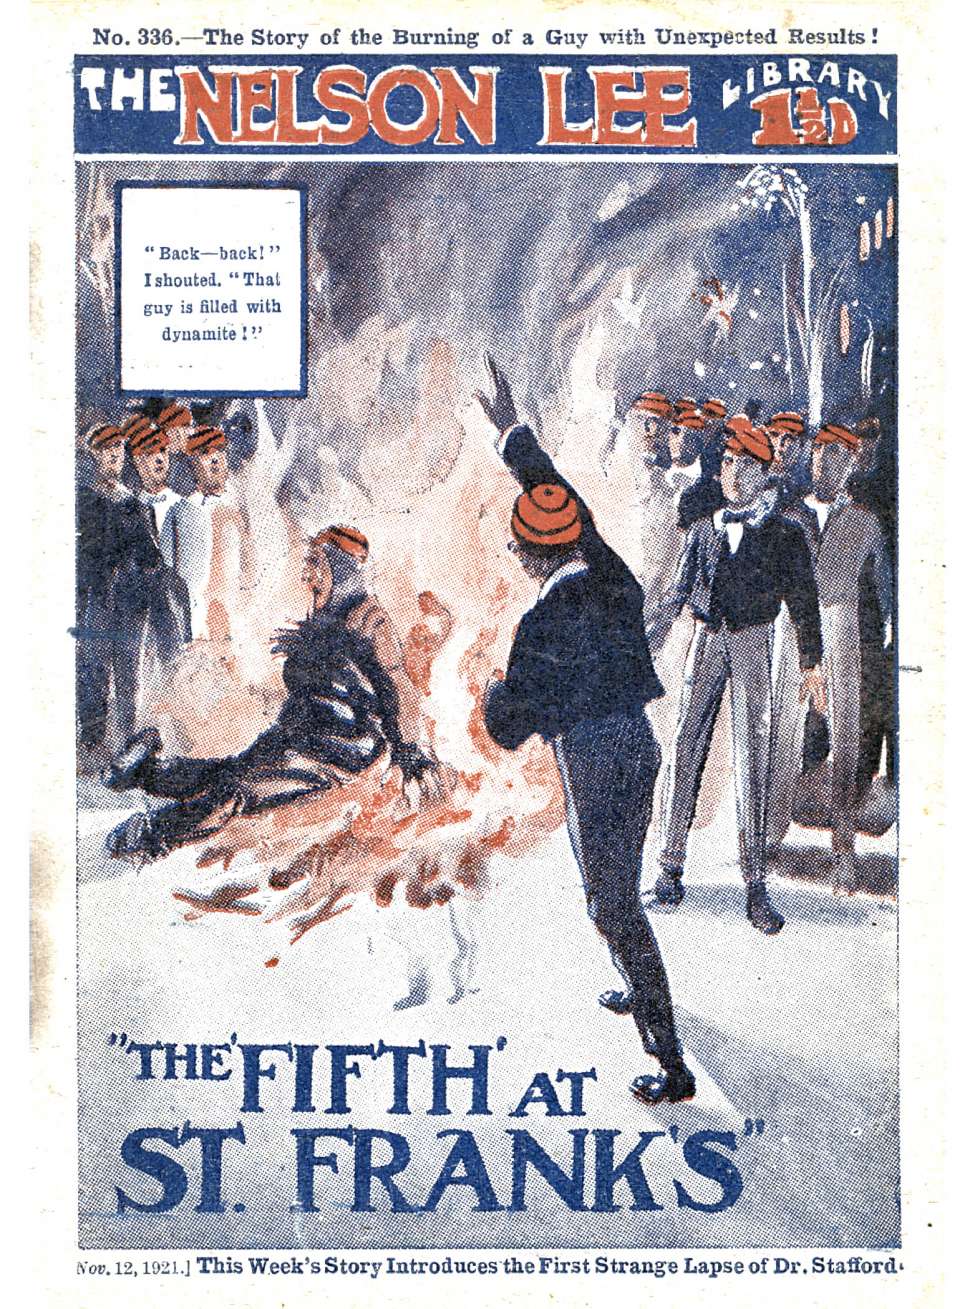 Book Cover For Nelson Lee Library s1 336 - The Fifth at St. Frank's